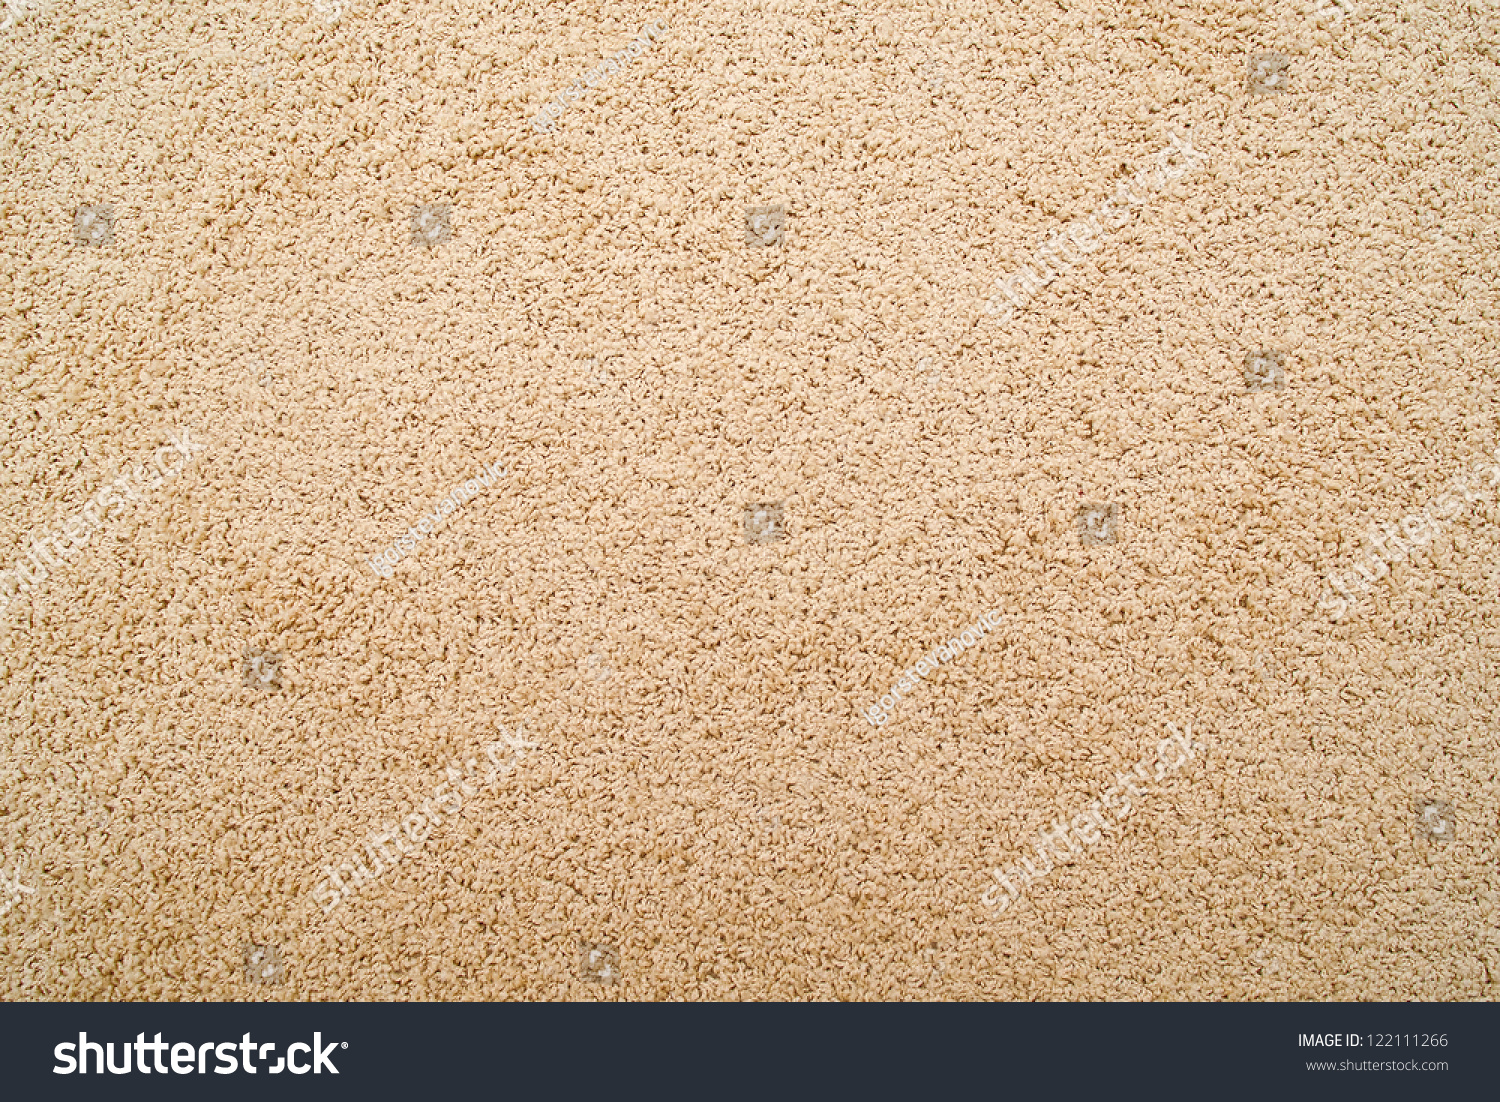 Carpet Texture Abstract Background Top View Stock Photo (Edit Now ...